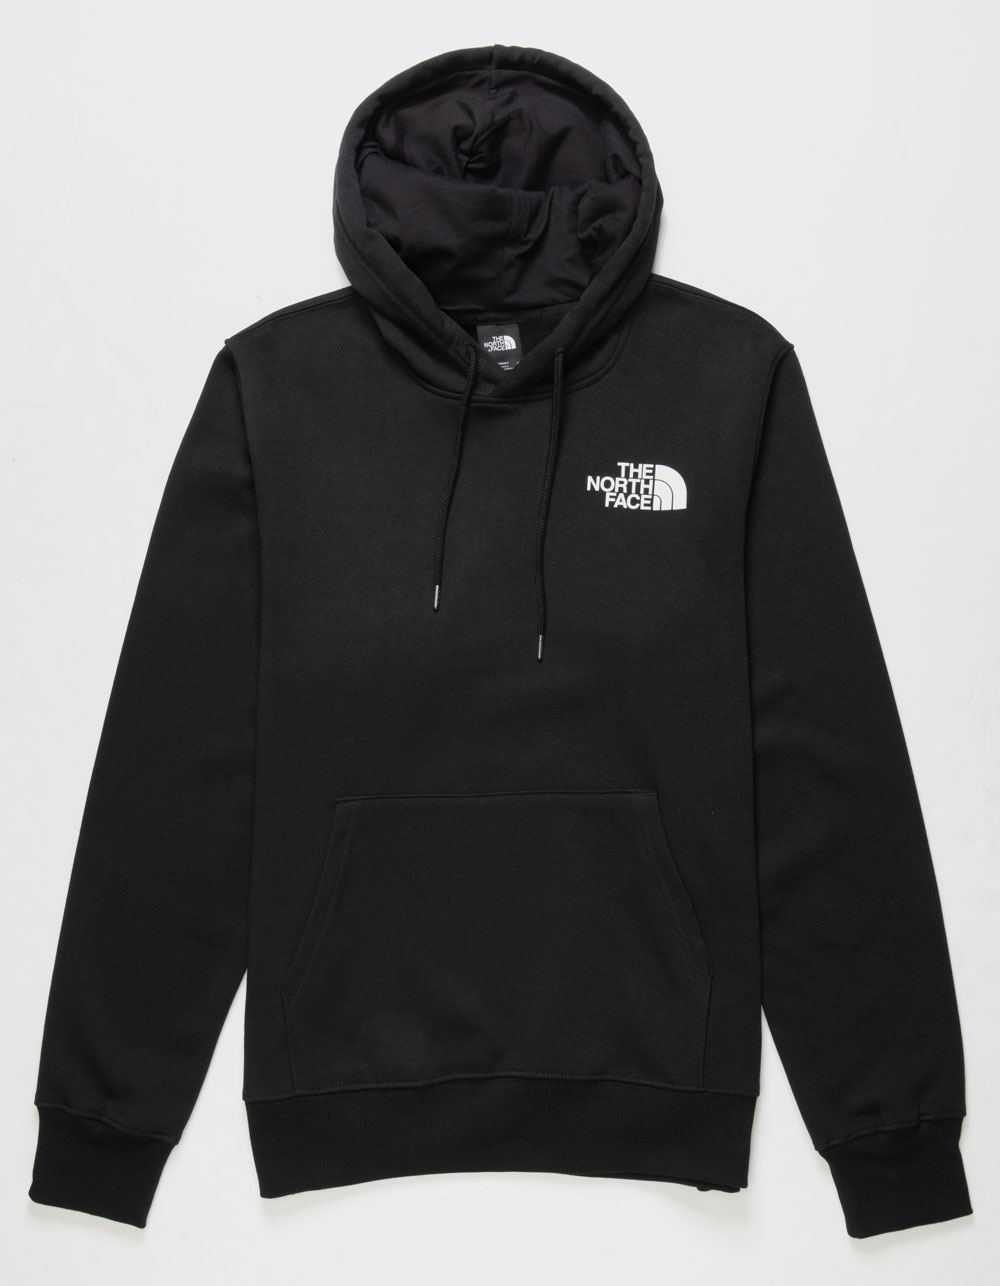 THE NORTH FACE Places We Love Mens Hoodie